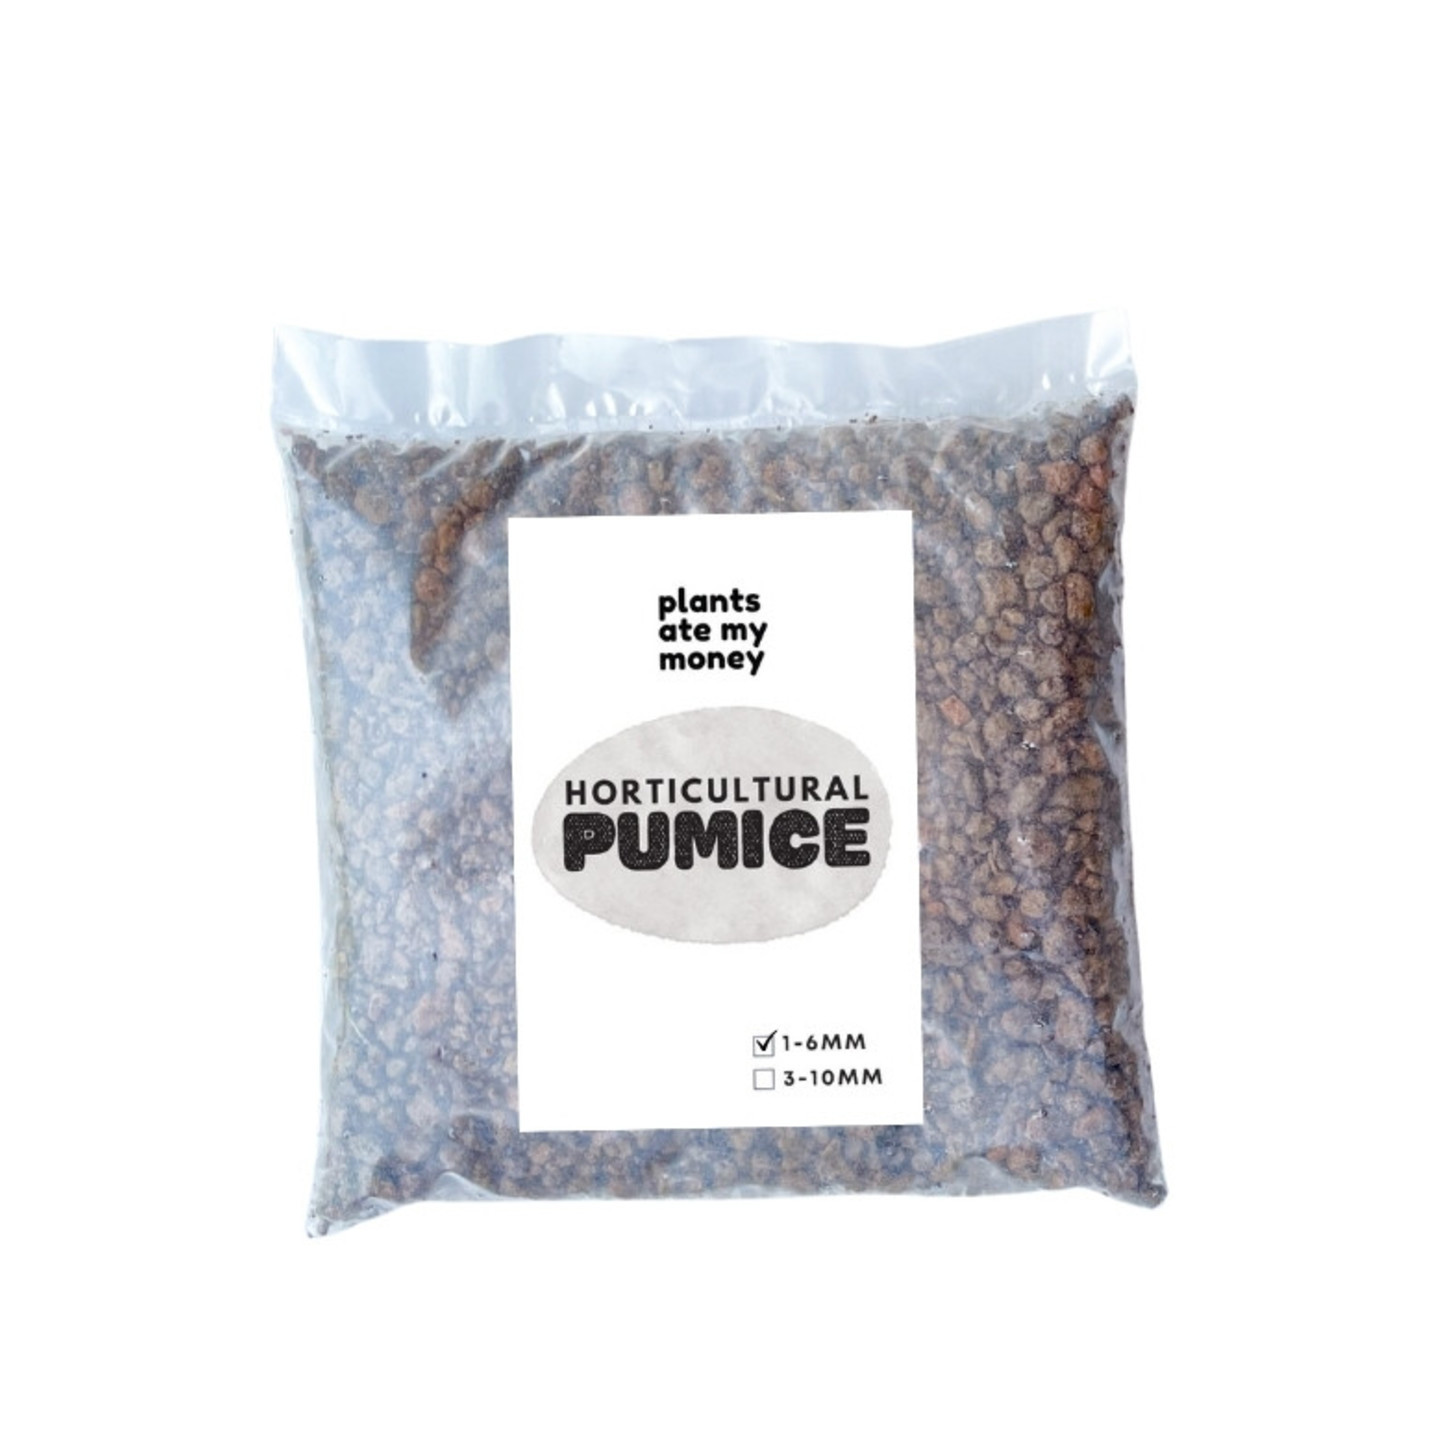 2 Litres - Pumice 1-6mm